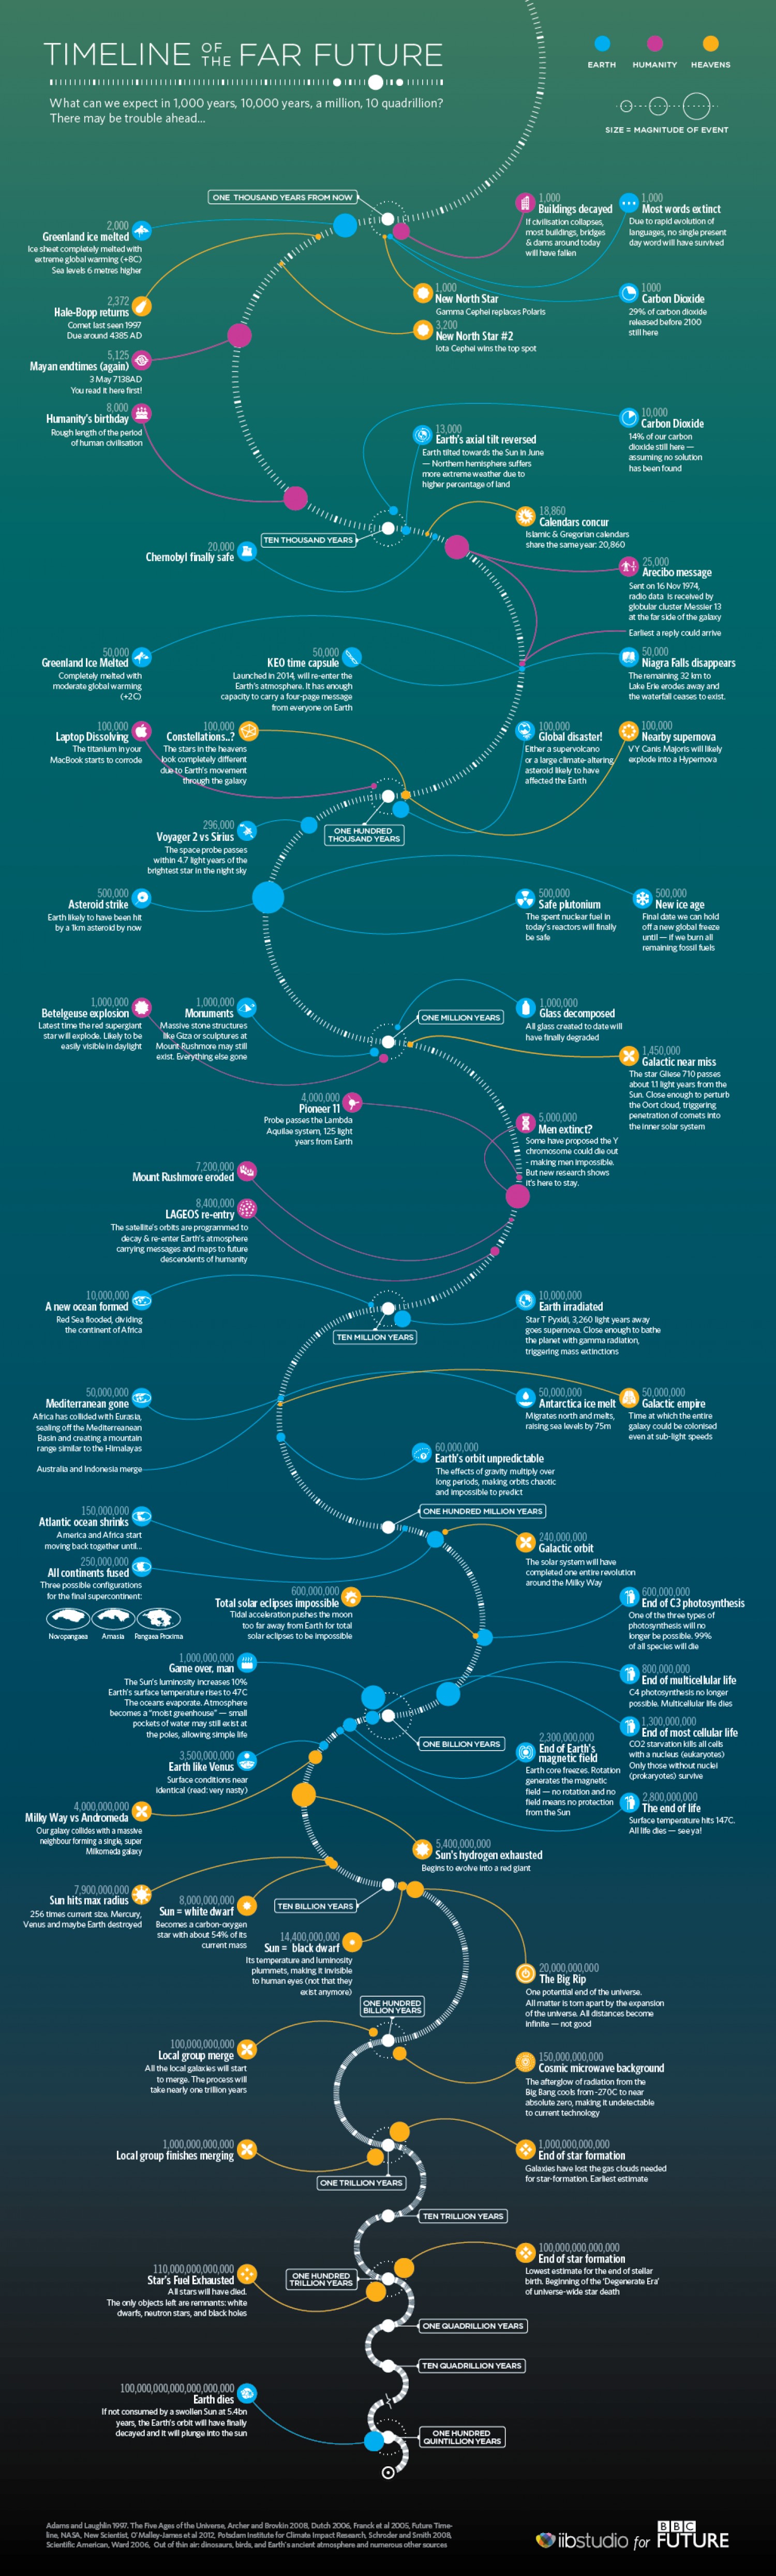 timeline-of-the-far-future